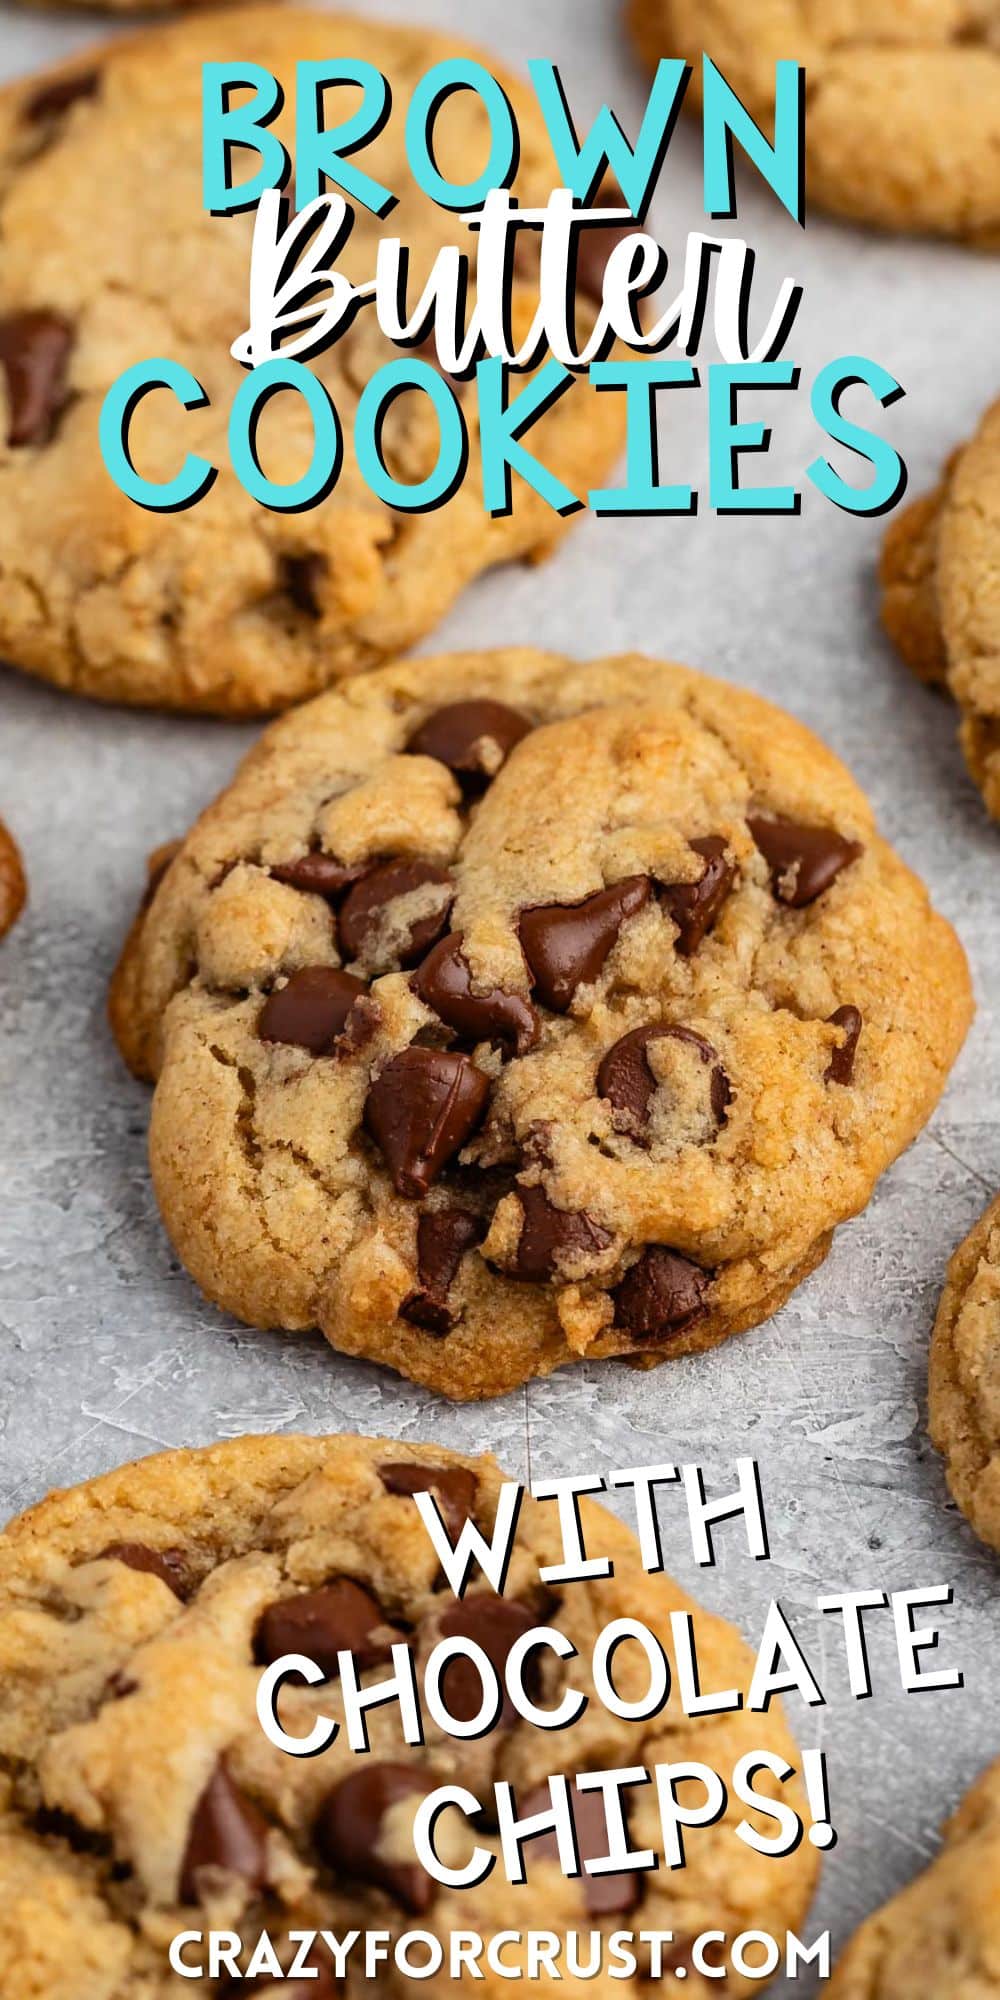 chocolate chip cookies with chocolate chips baked into the center with words on the image.